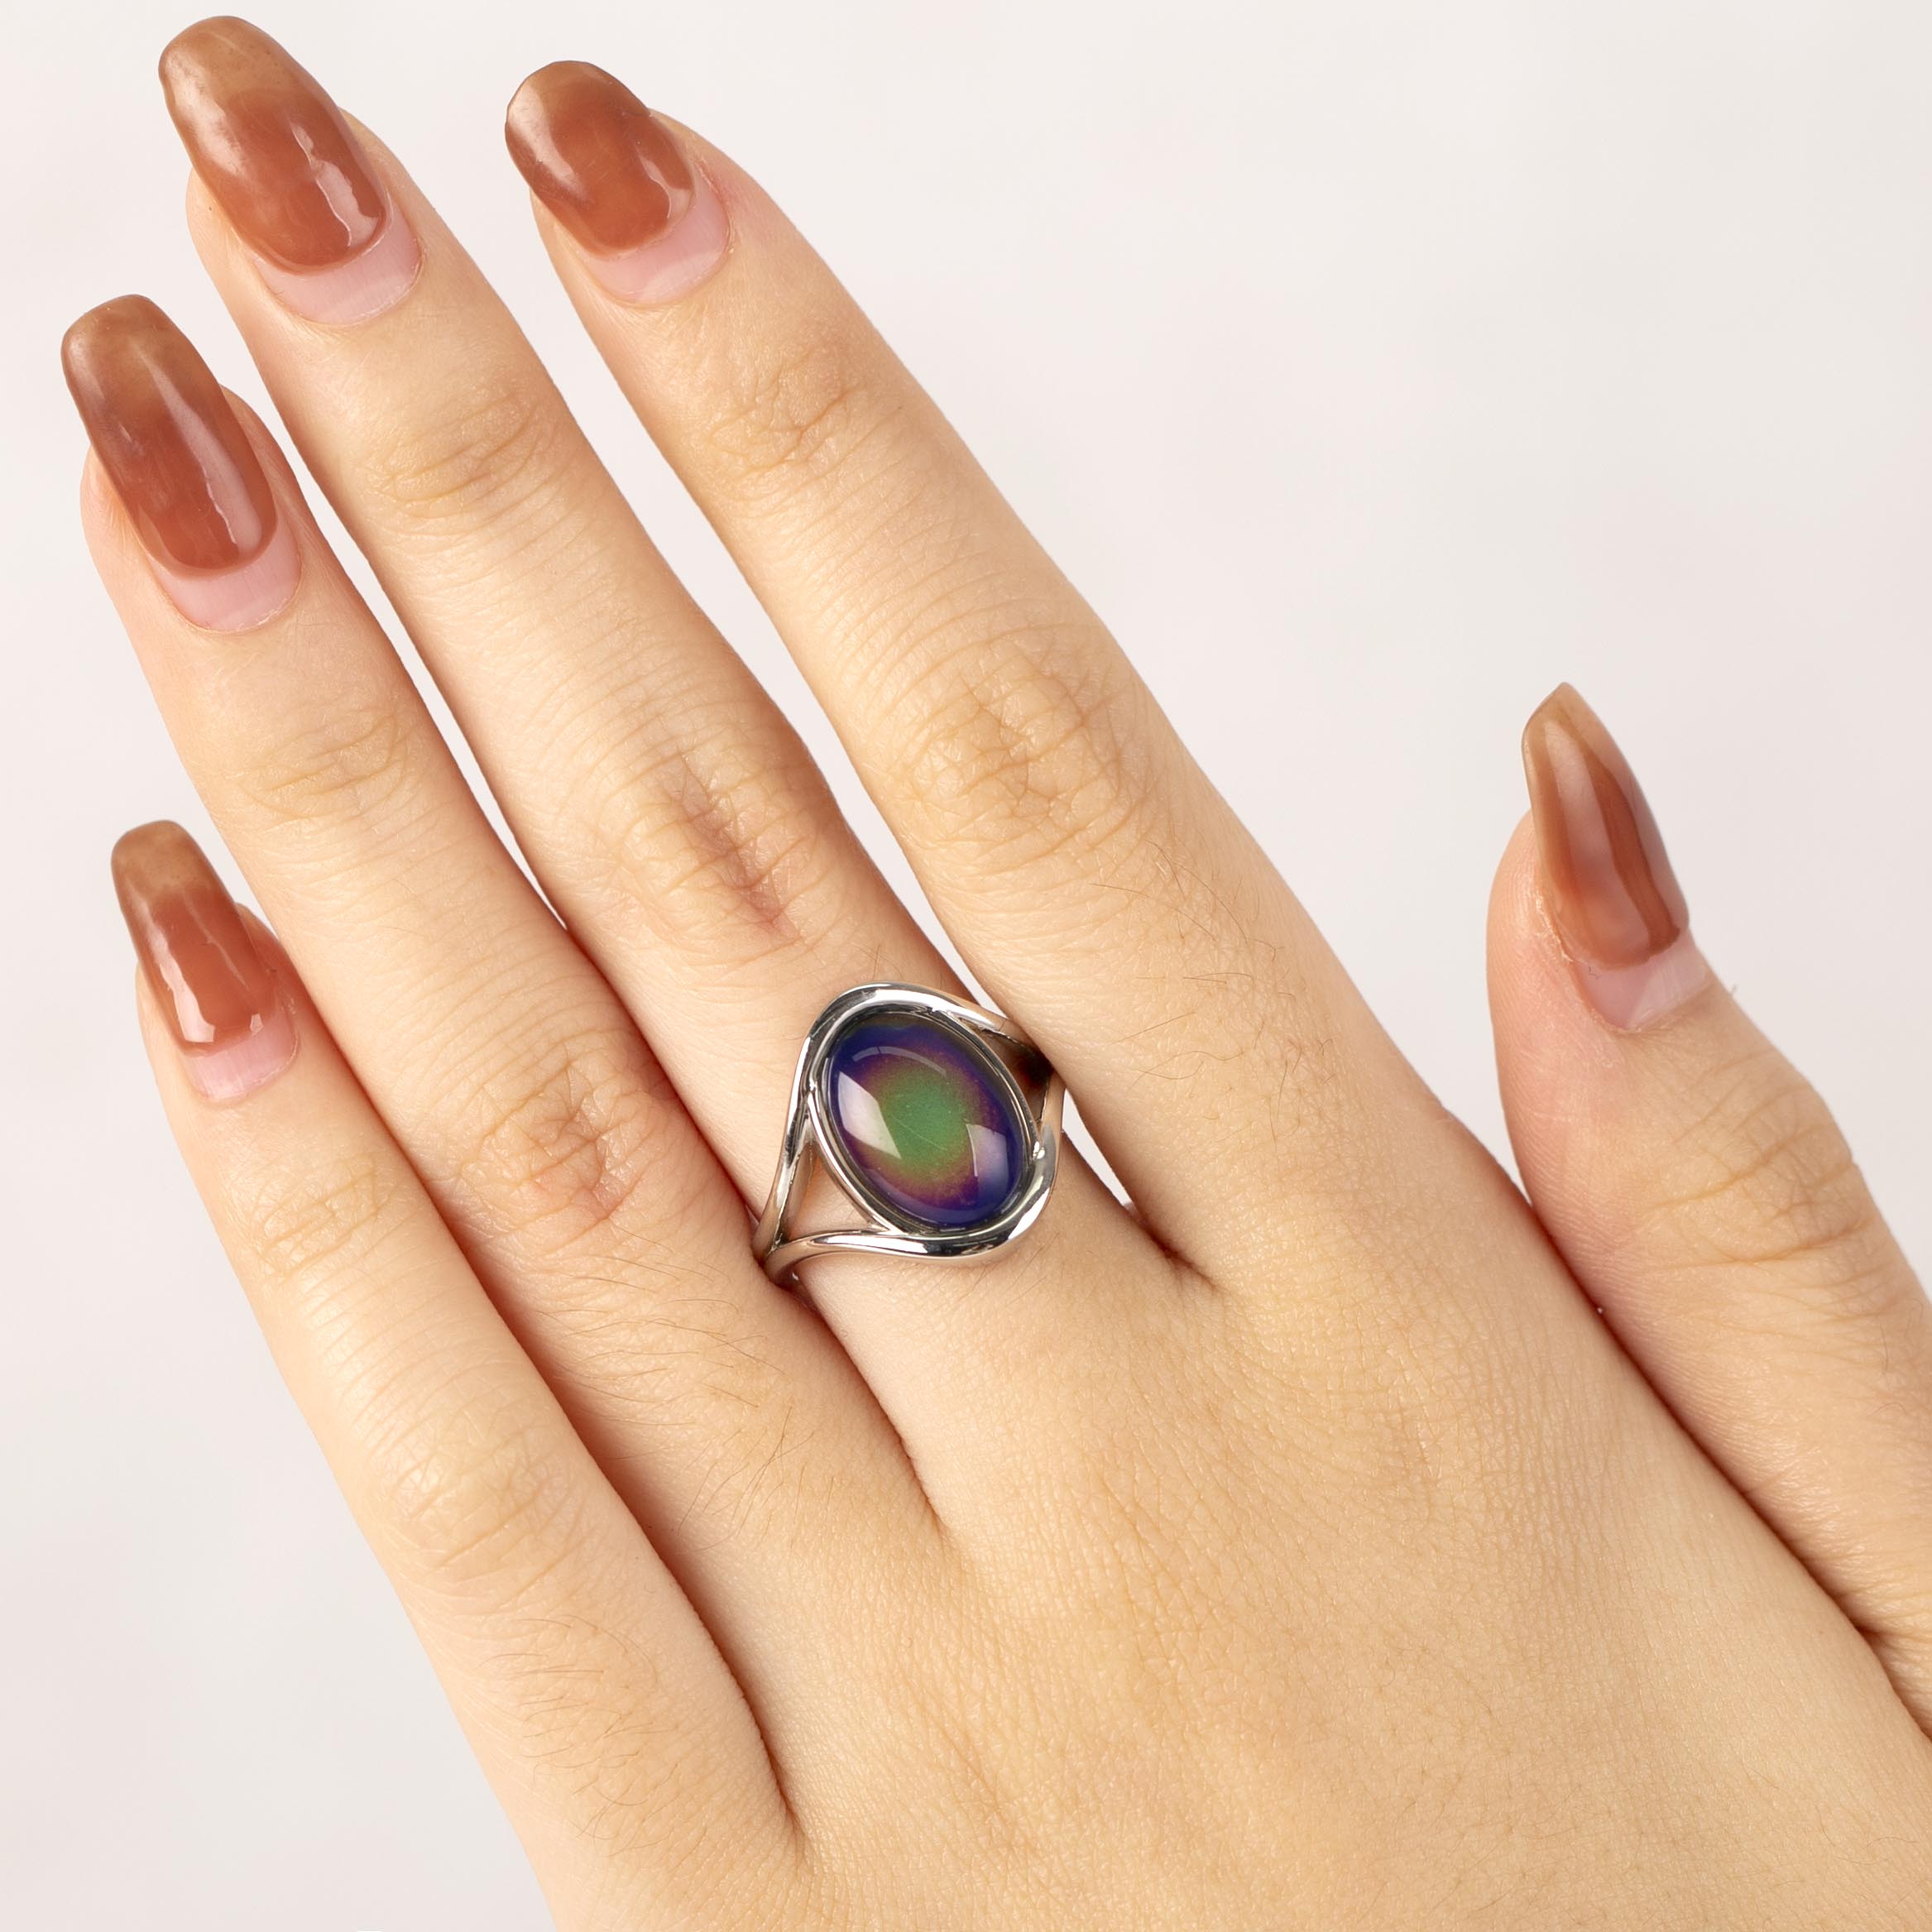 Vintage Antique Color Changing Mood Ring In Sterling Silver - aurorapromise